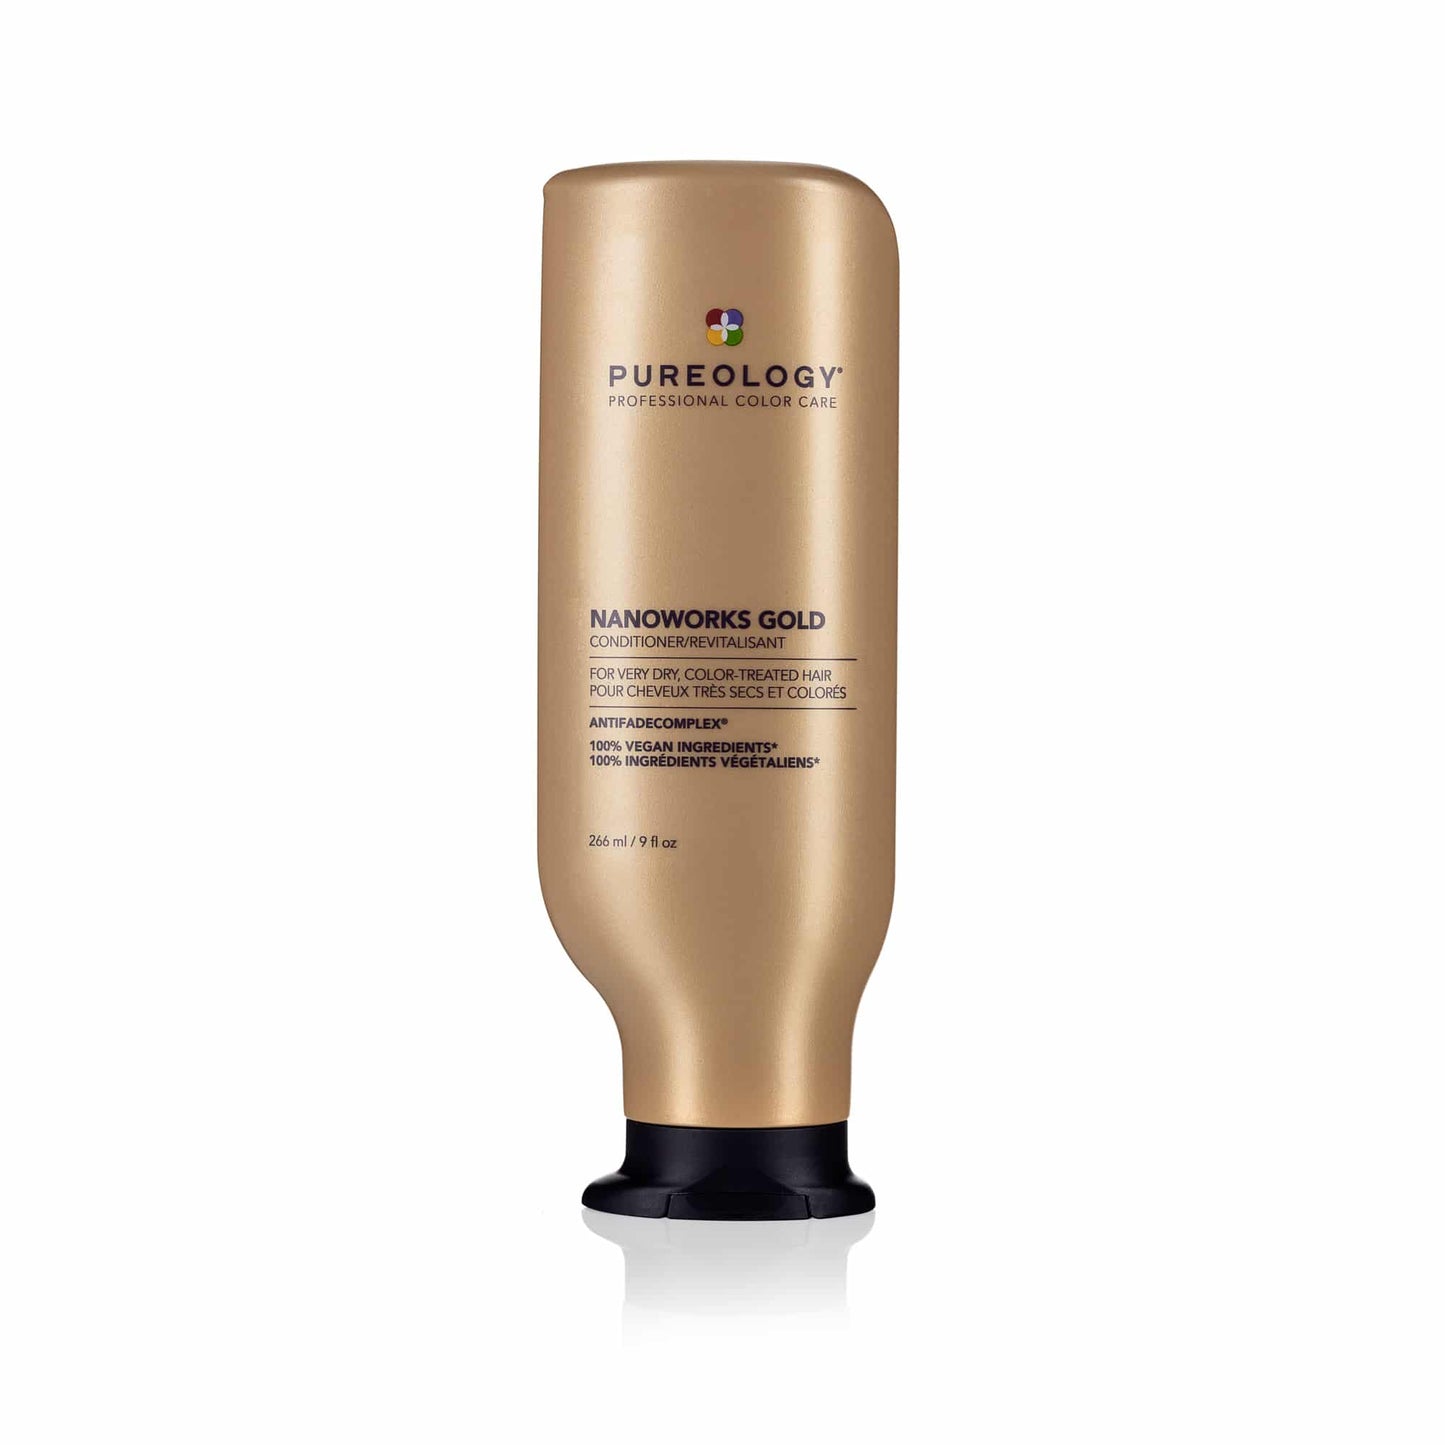 Pureology Nanoworks Gold Conditioner - 266ml